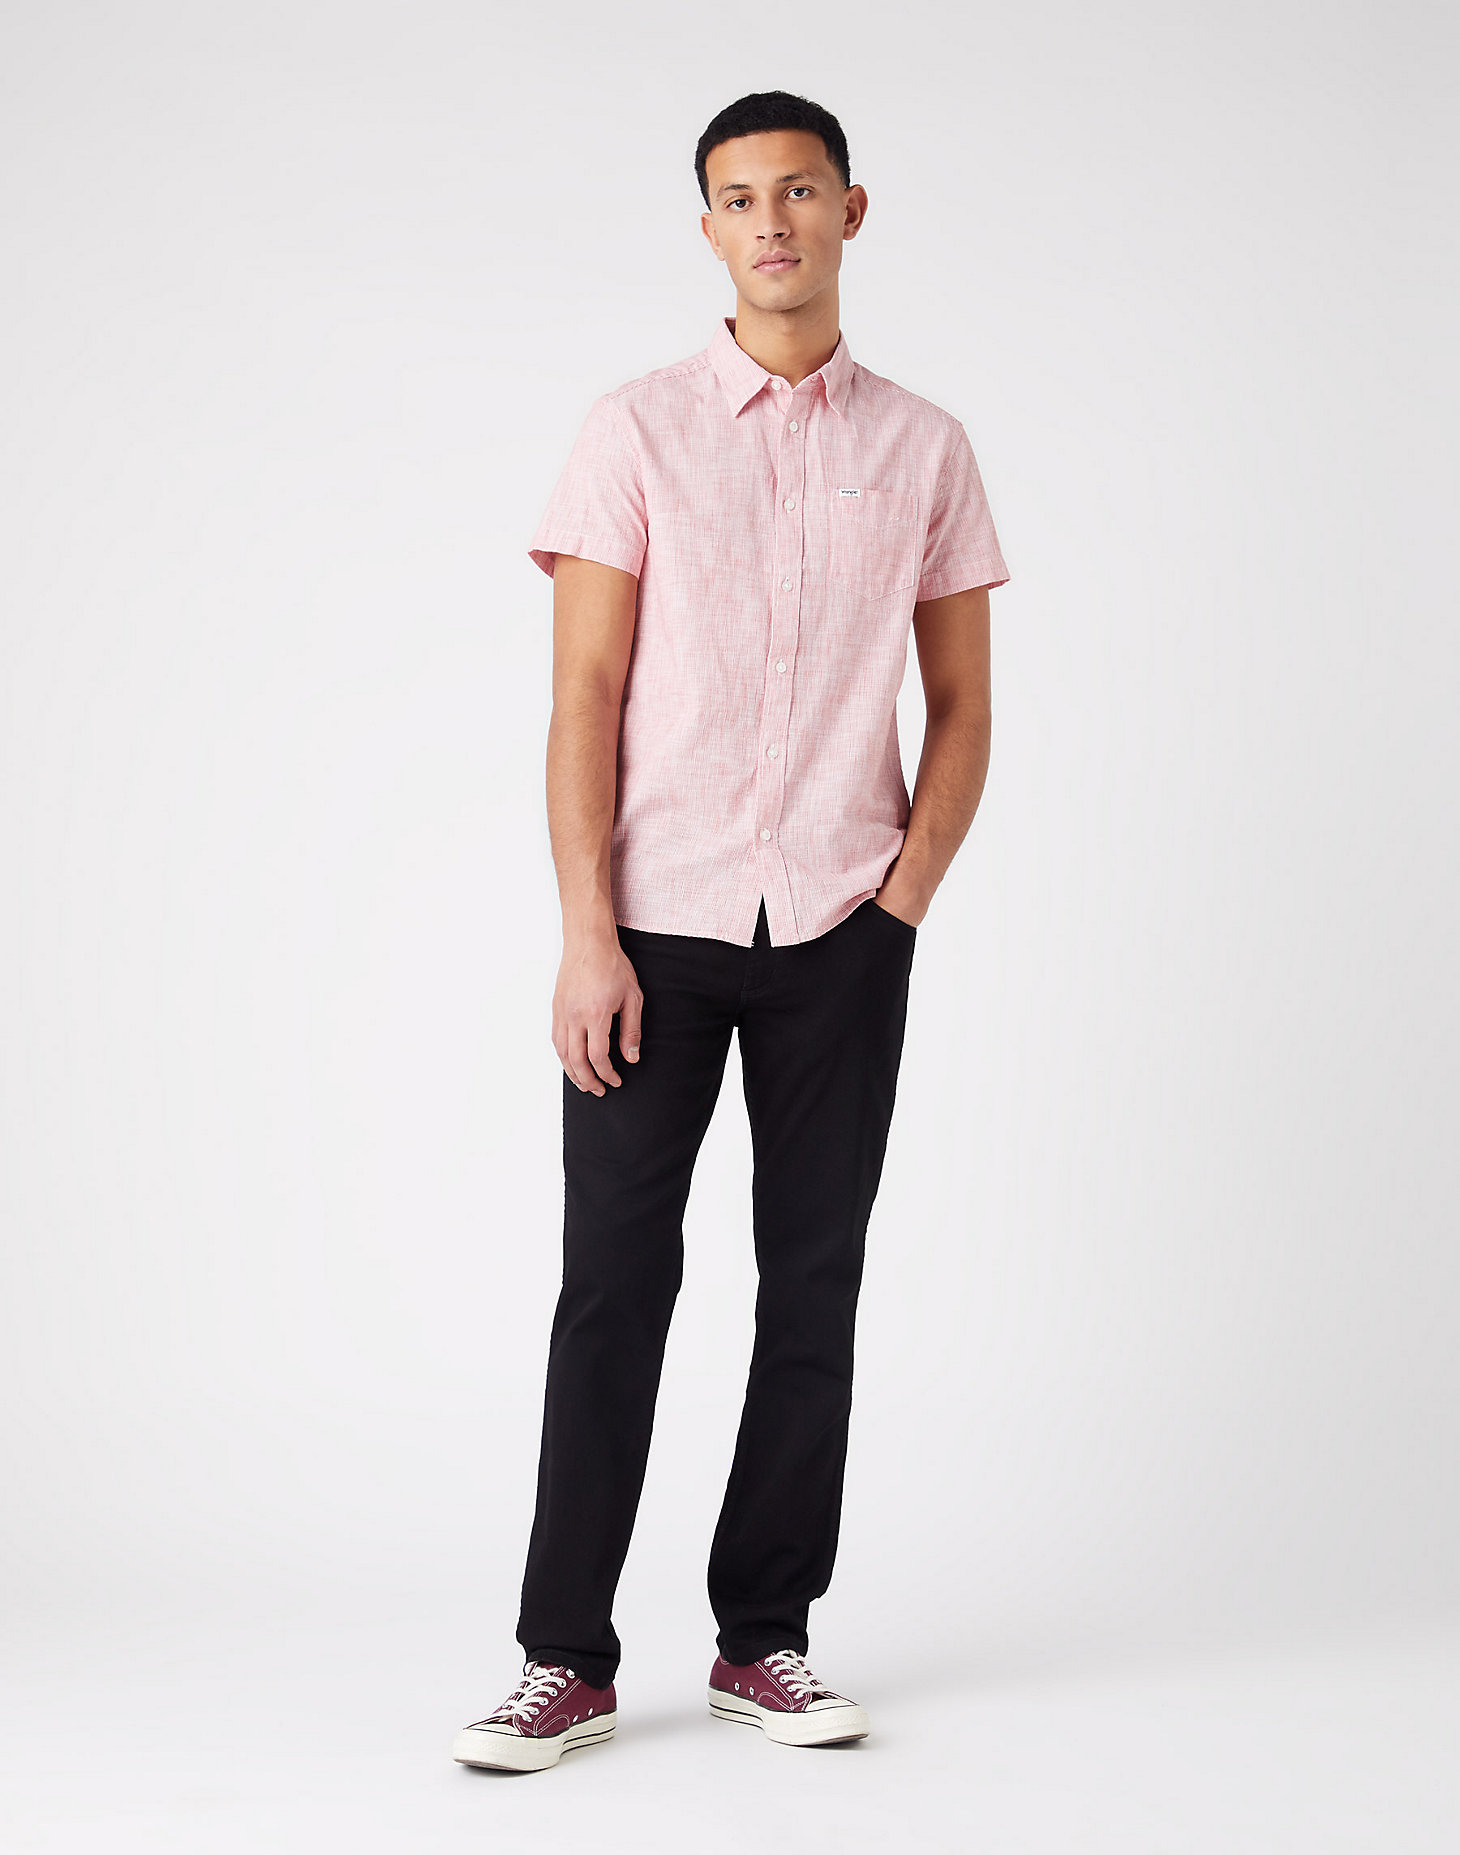 Short Sleeve One Pocket Shirt in Flame Red alternative view 1